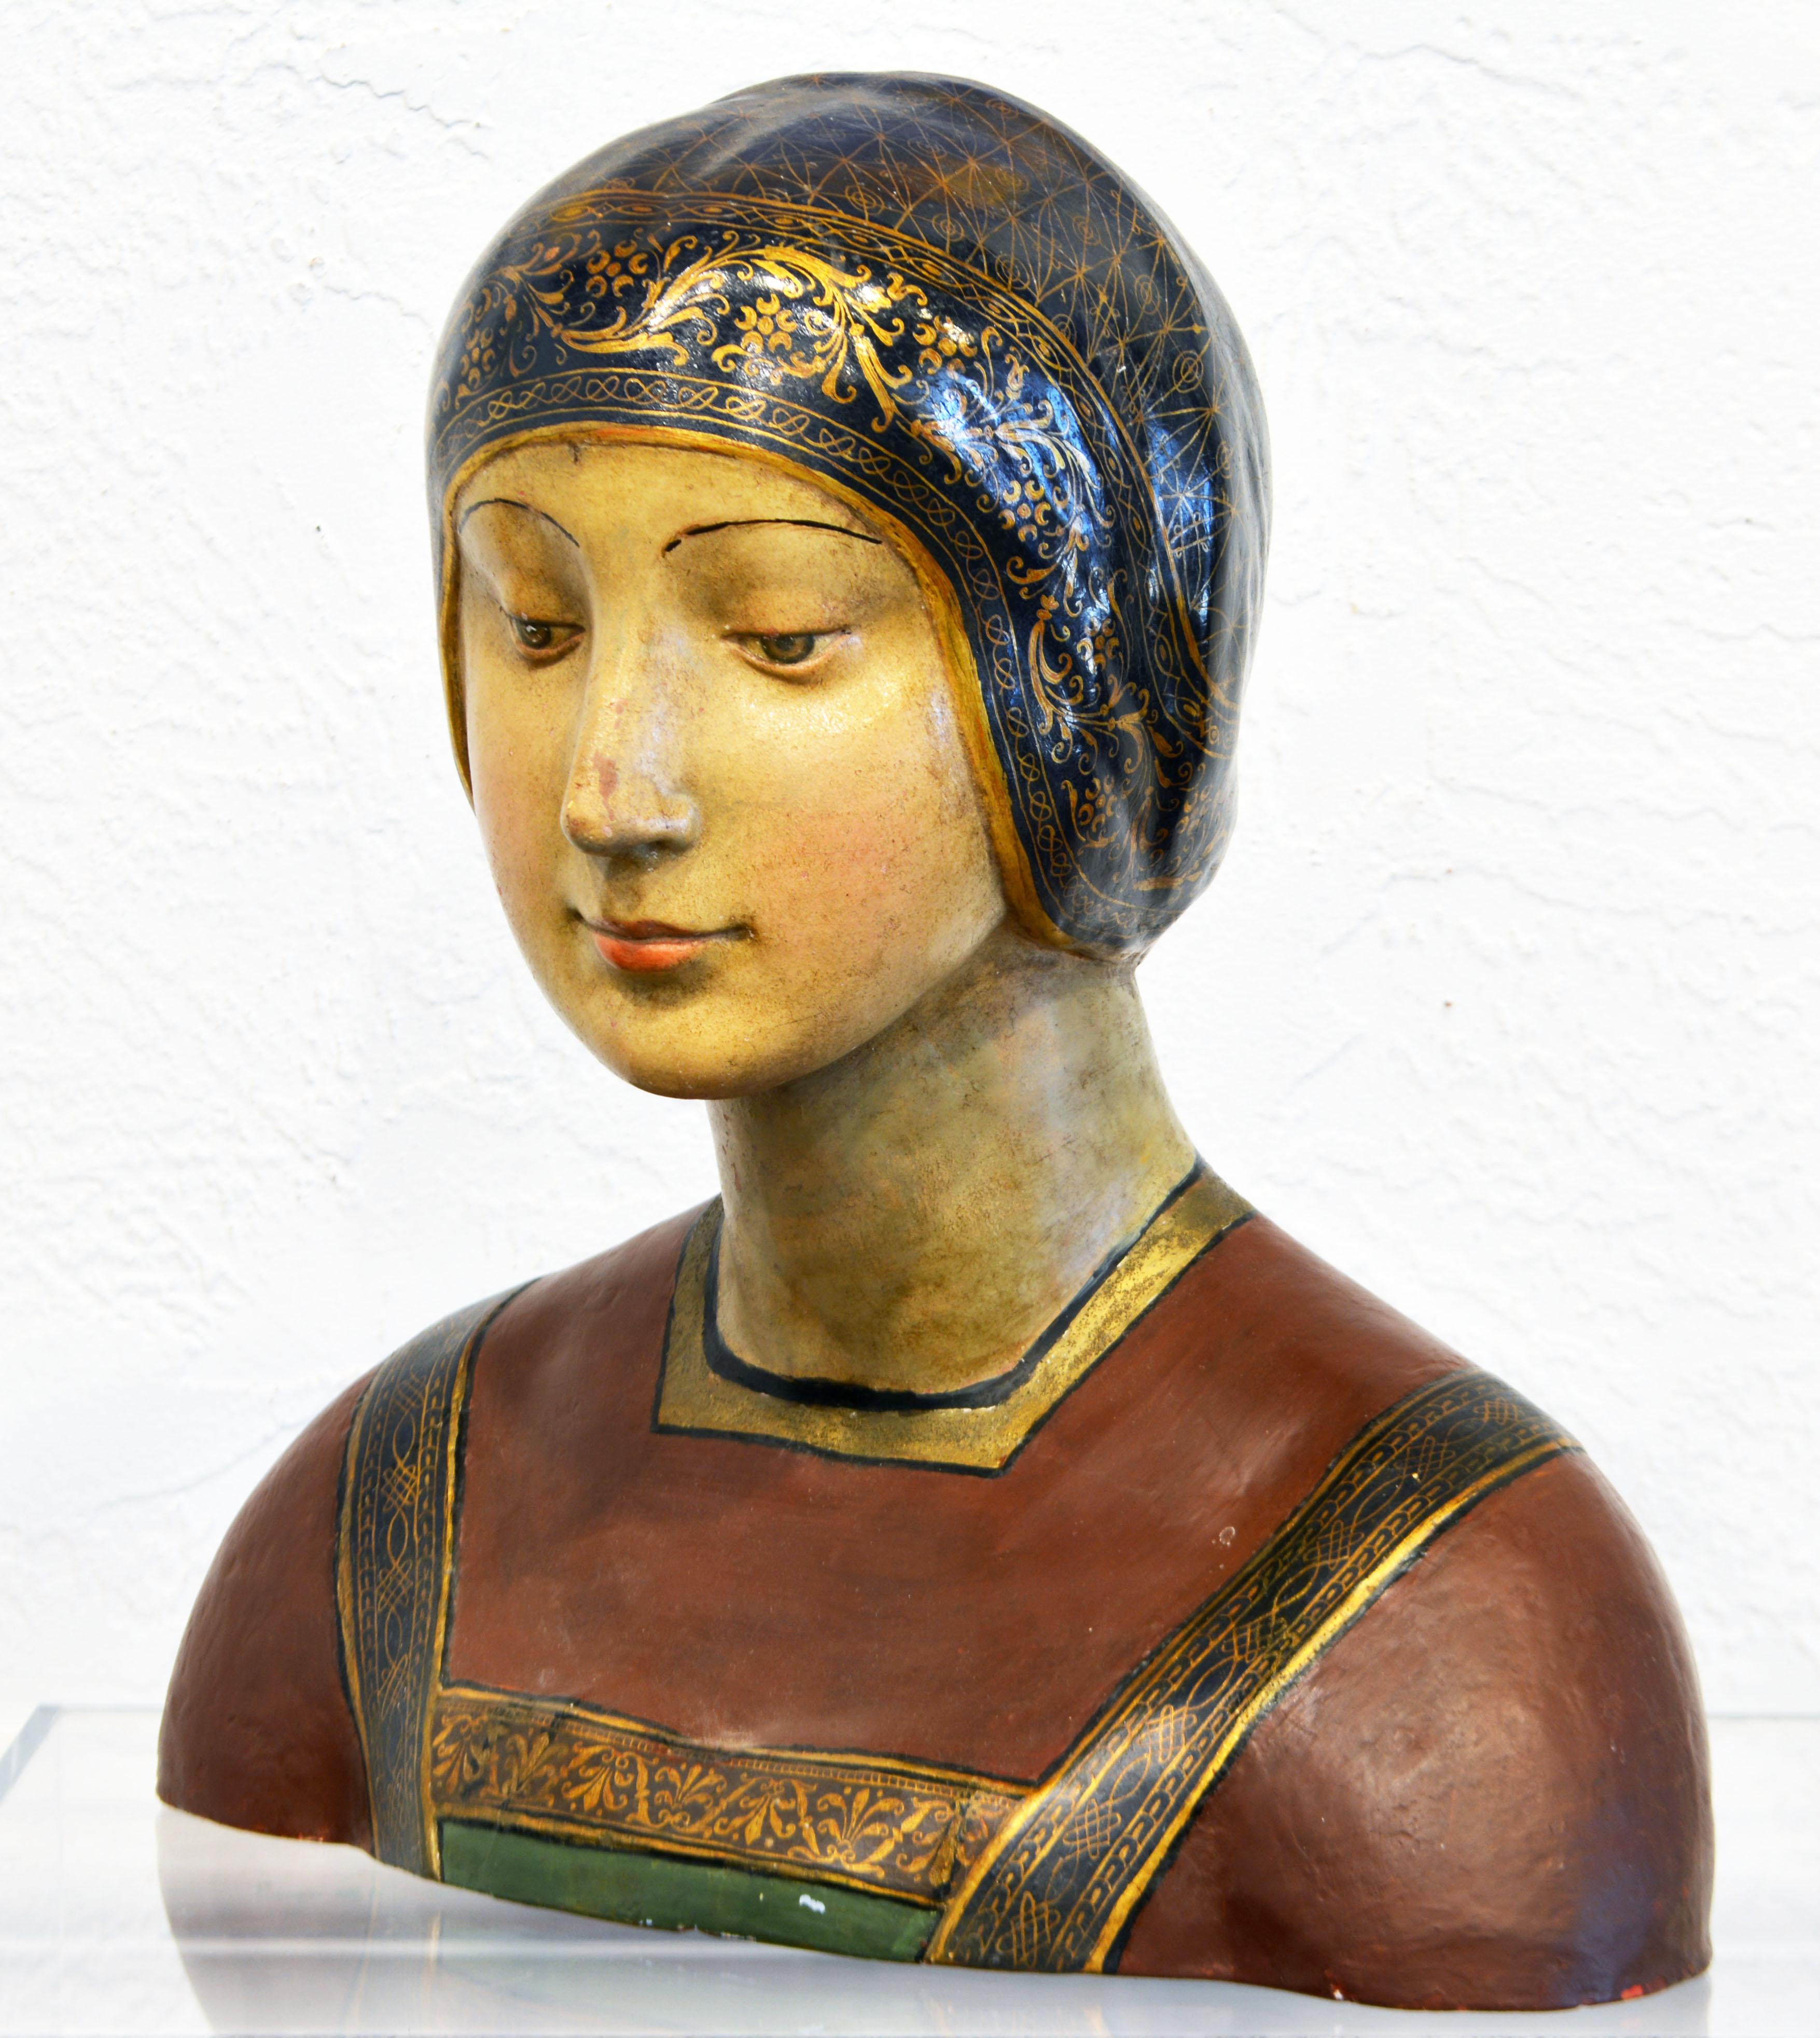 This superbly painted and gilt decorated renaissance style terracotta bust is based on a sculpture of a young woman often referred to as Isabella of Aragon by Francesco Laurana (Late 15th century). During the 19th century and into the early 20th